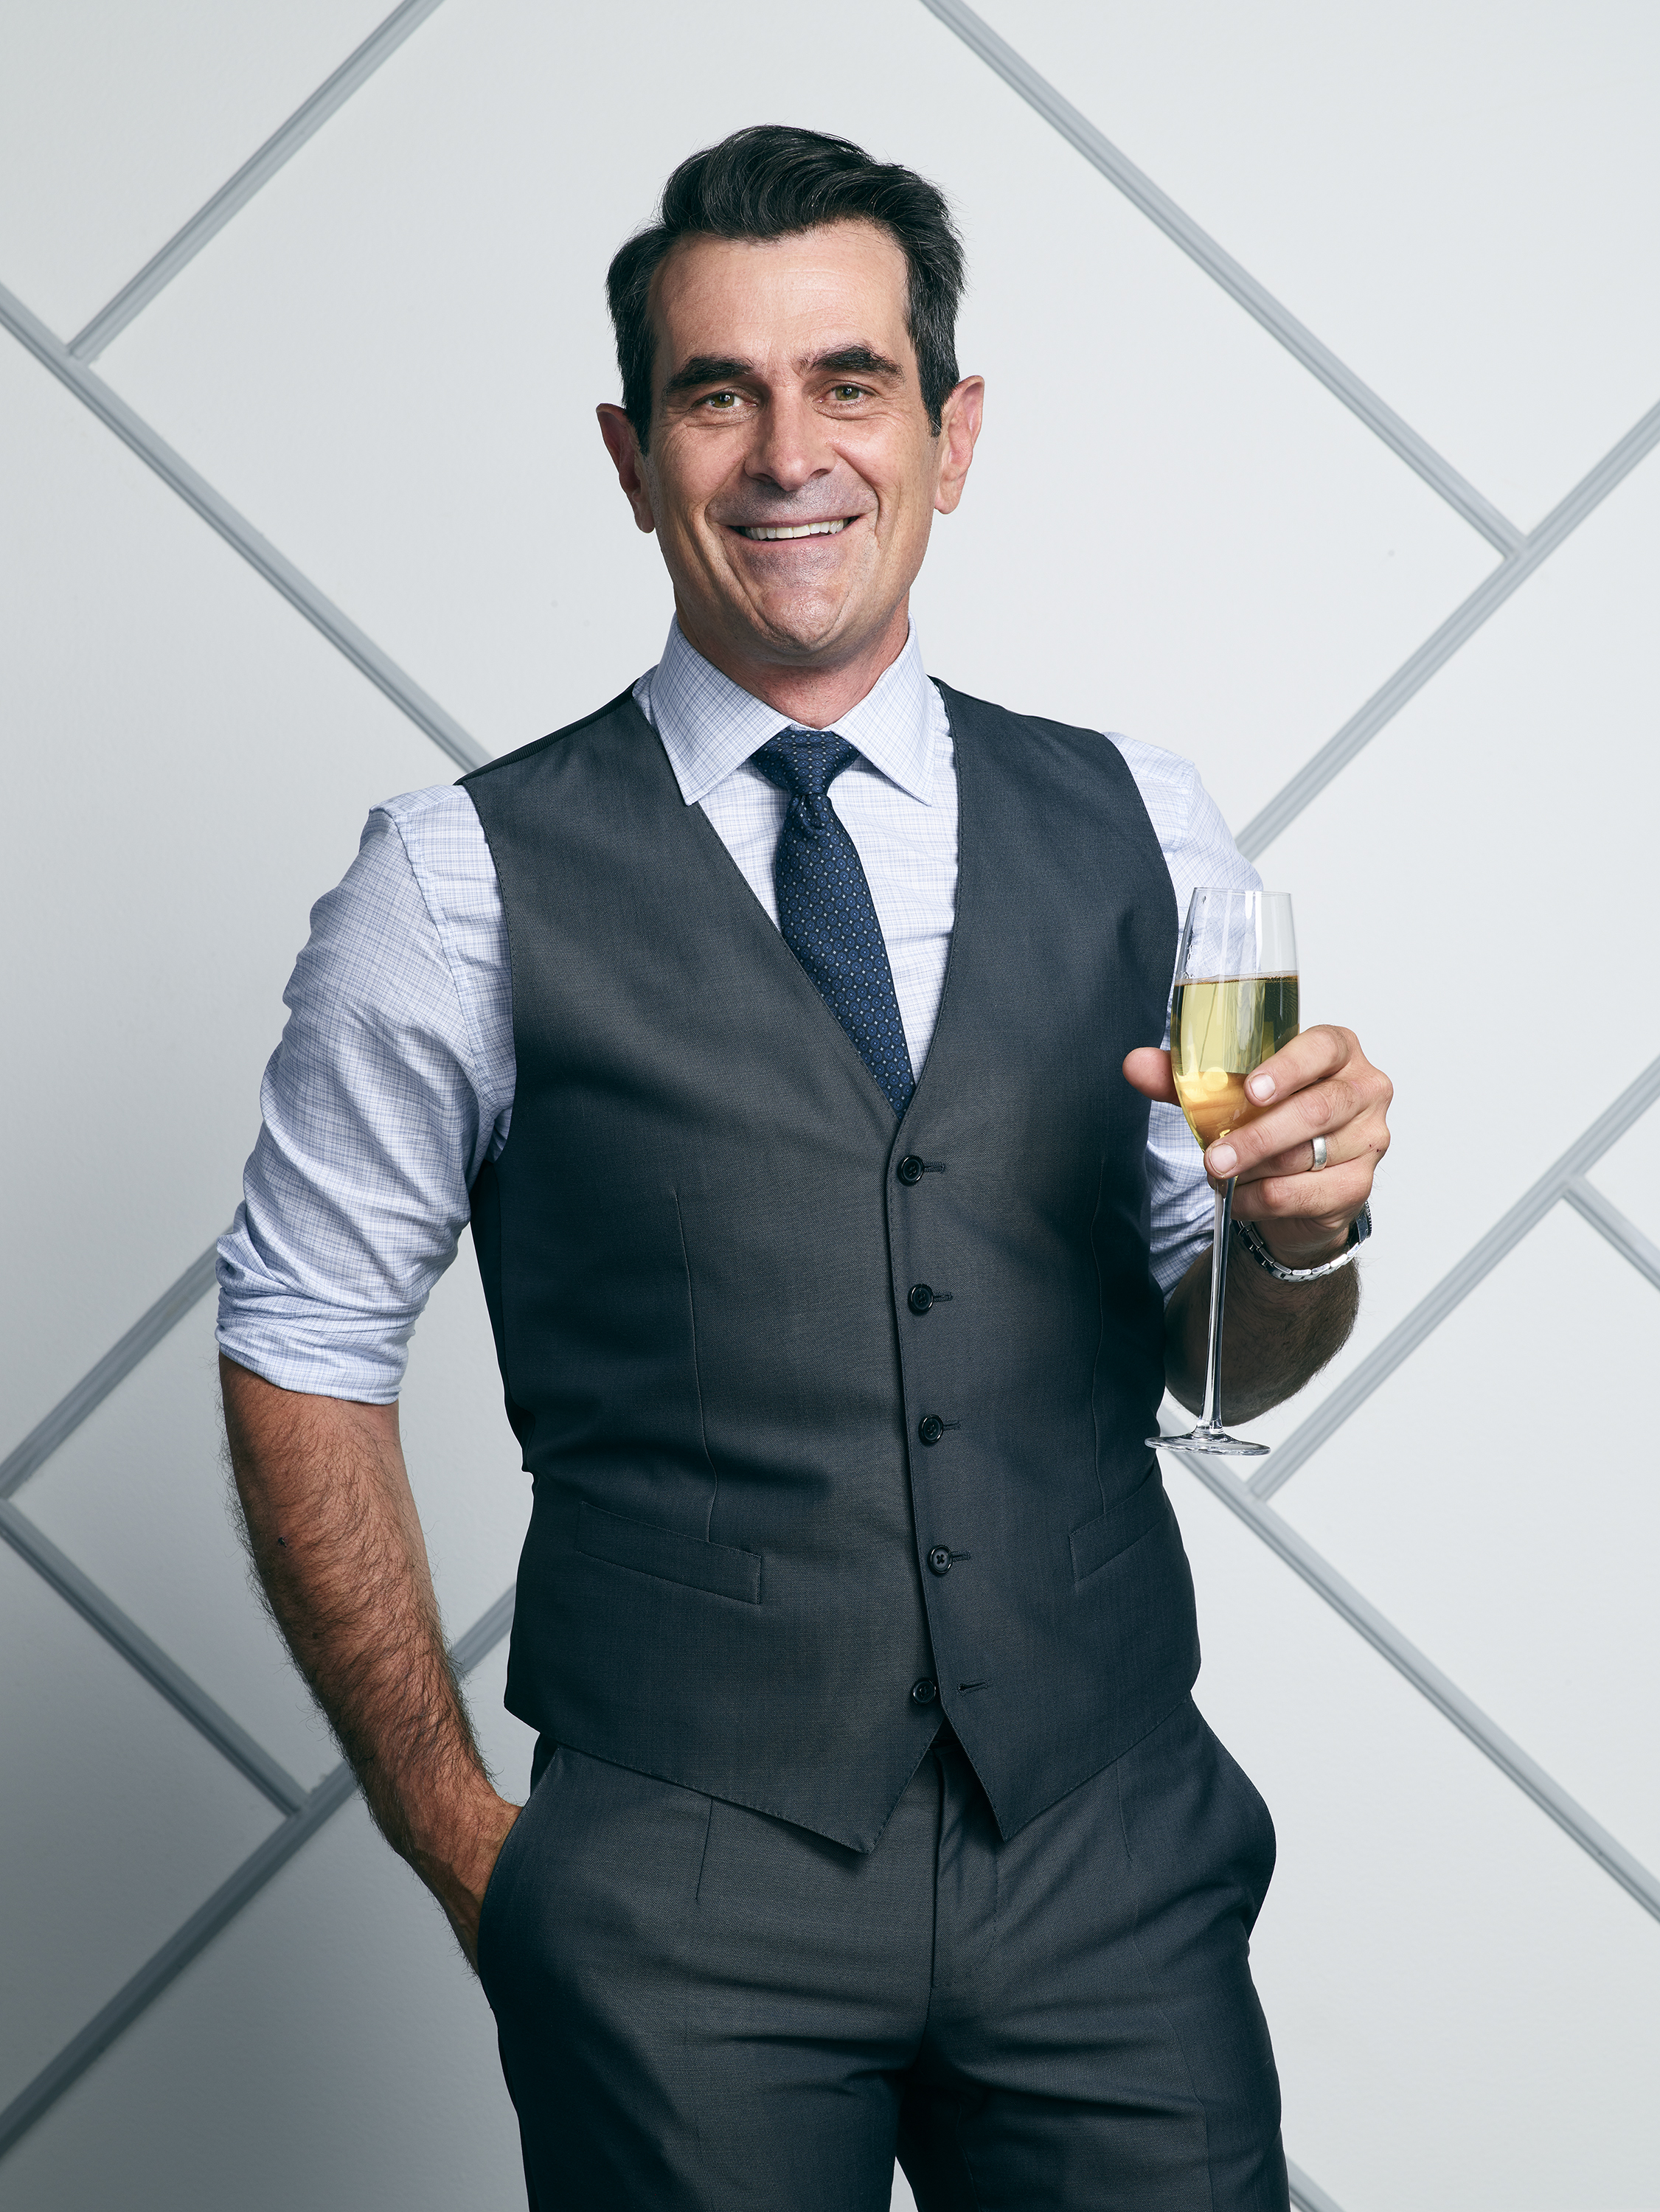 Ty Burrell playing the role of Phil Dunphy on ABC's "Modern Family" season 11 | Source: Getty Images